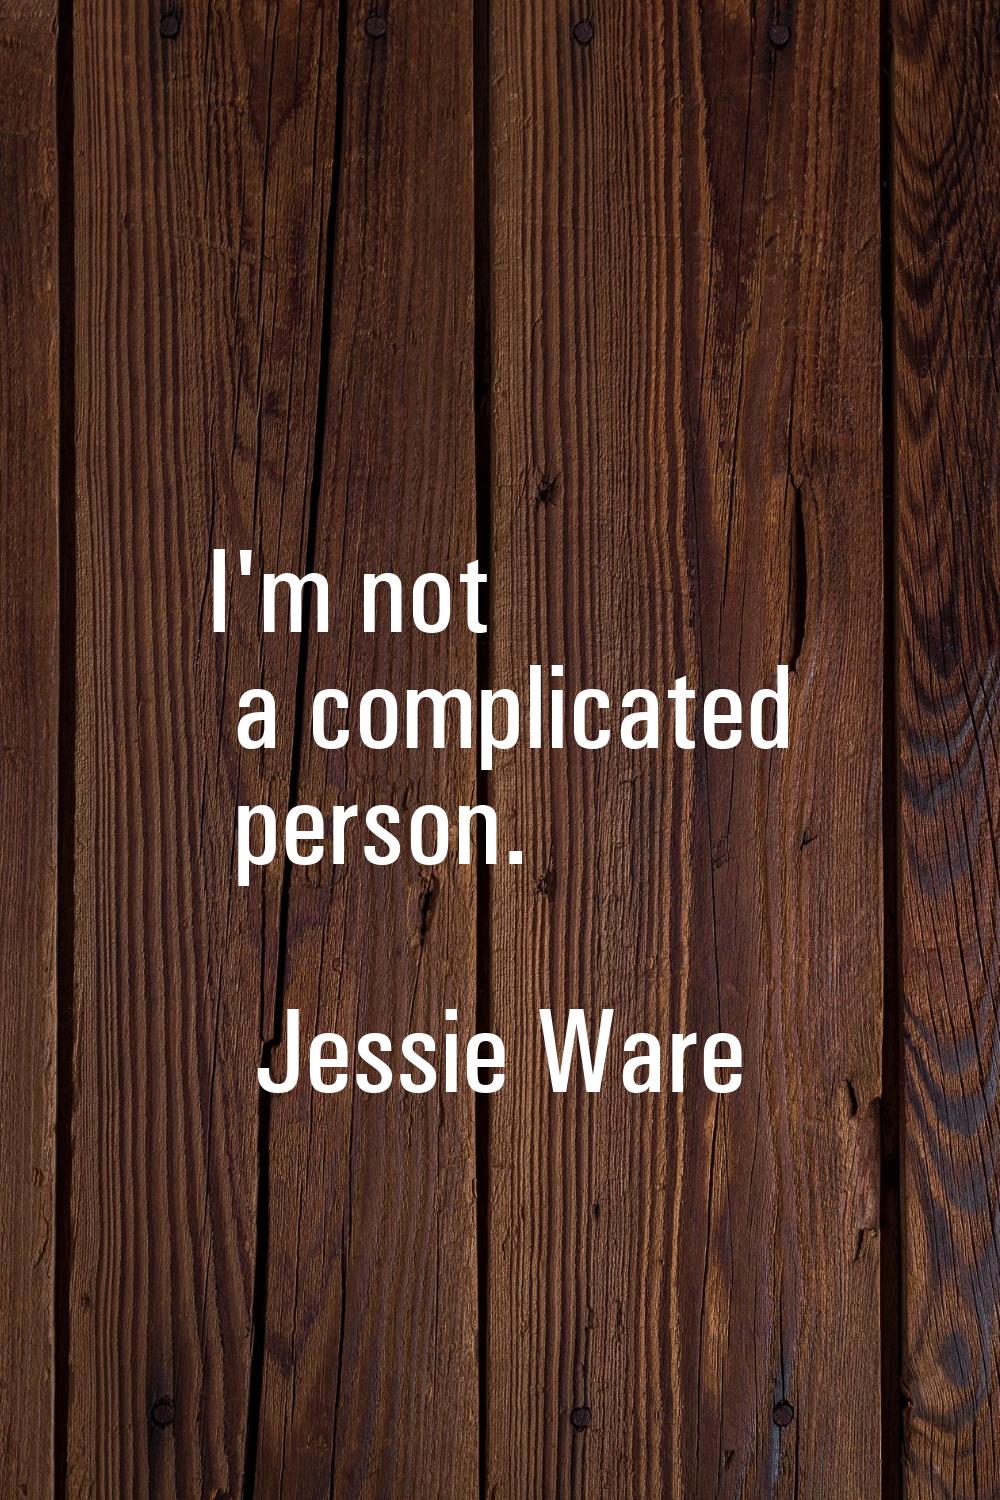 I'm not a complicated person.